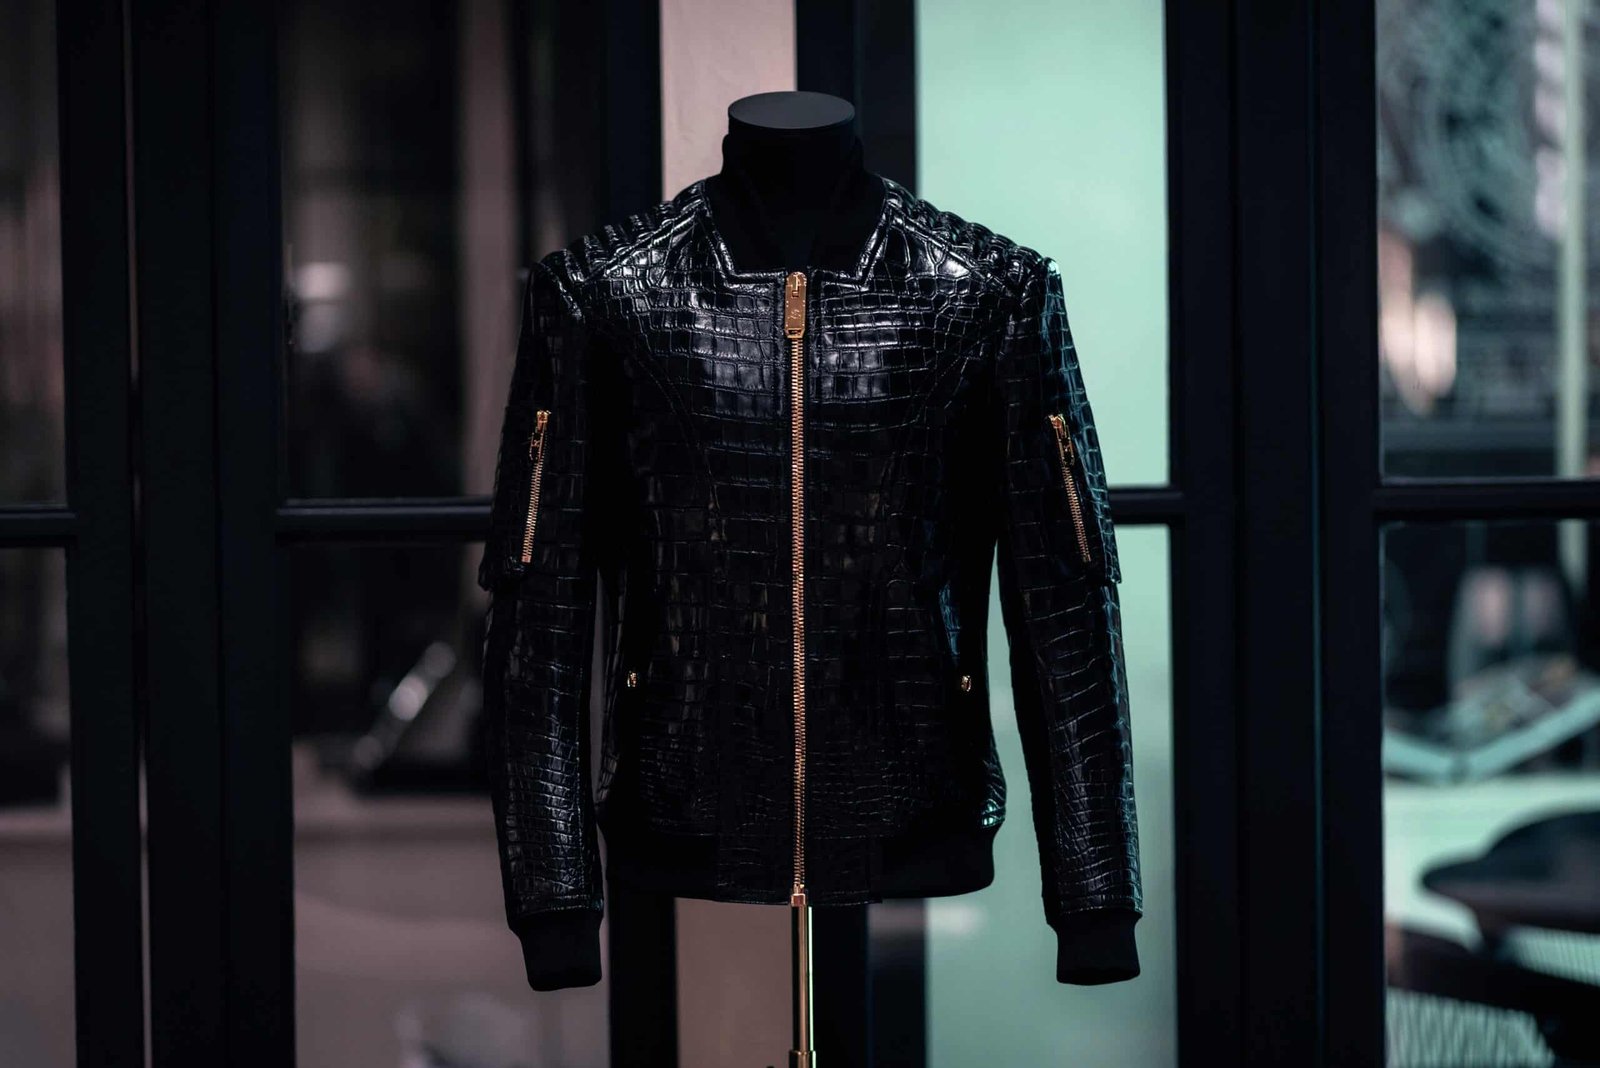 A black crocodile leather jacket hanging on a mannequin, showcasing its unique texture and high-quality craftsmanship. Its glossy finish and distinctive pattern make it a stunning piece that stands out among other